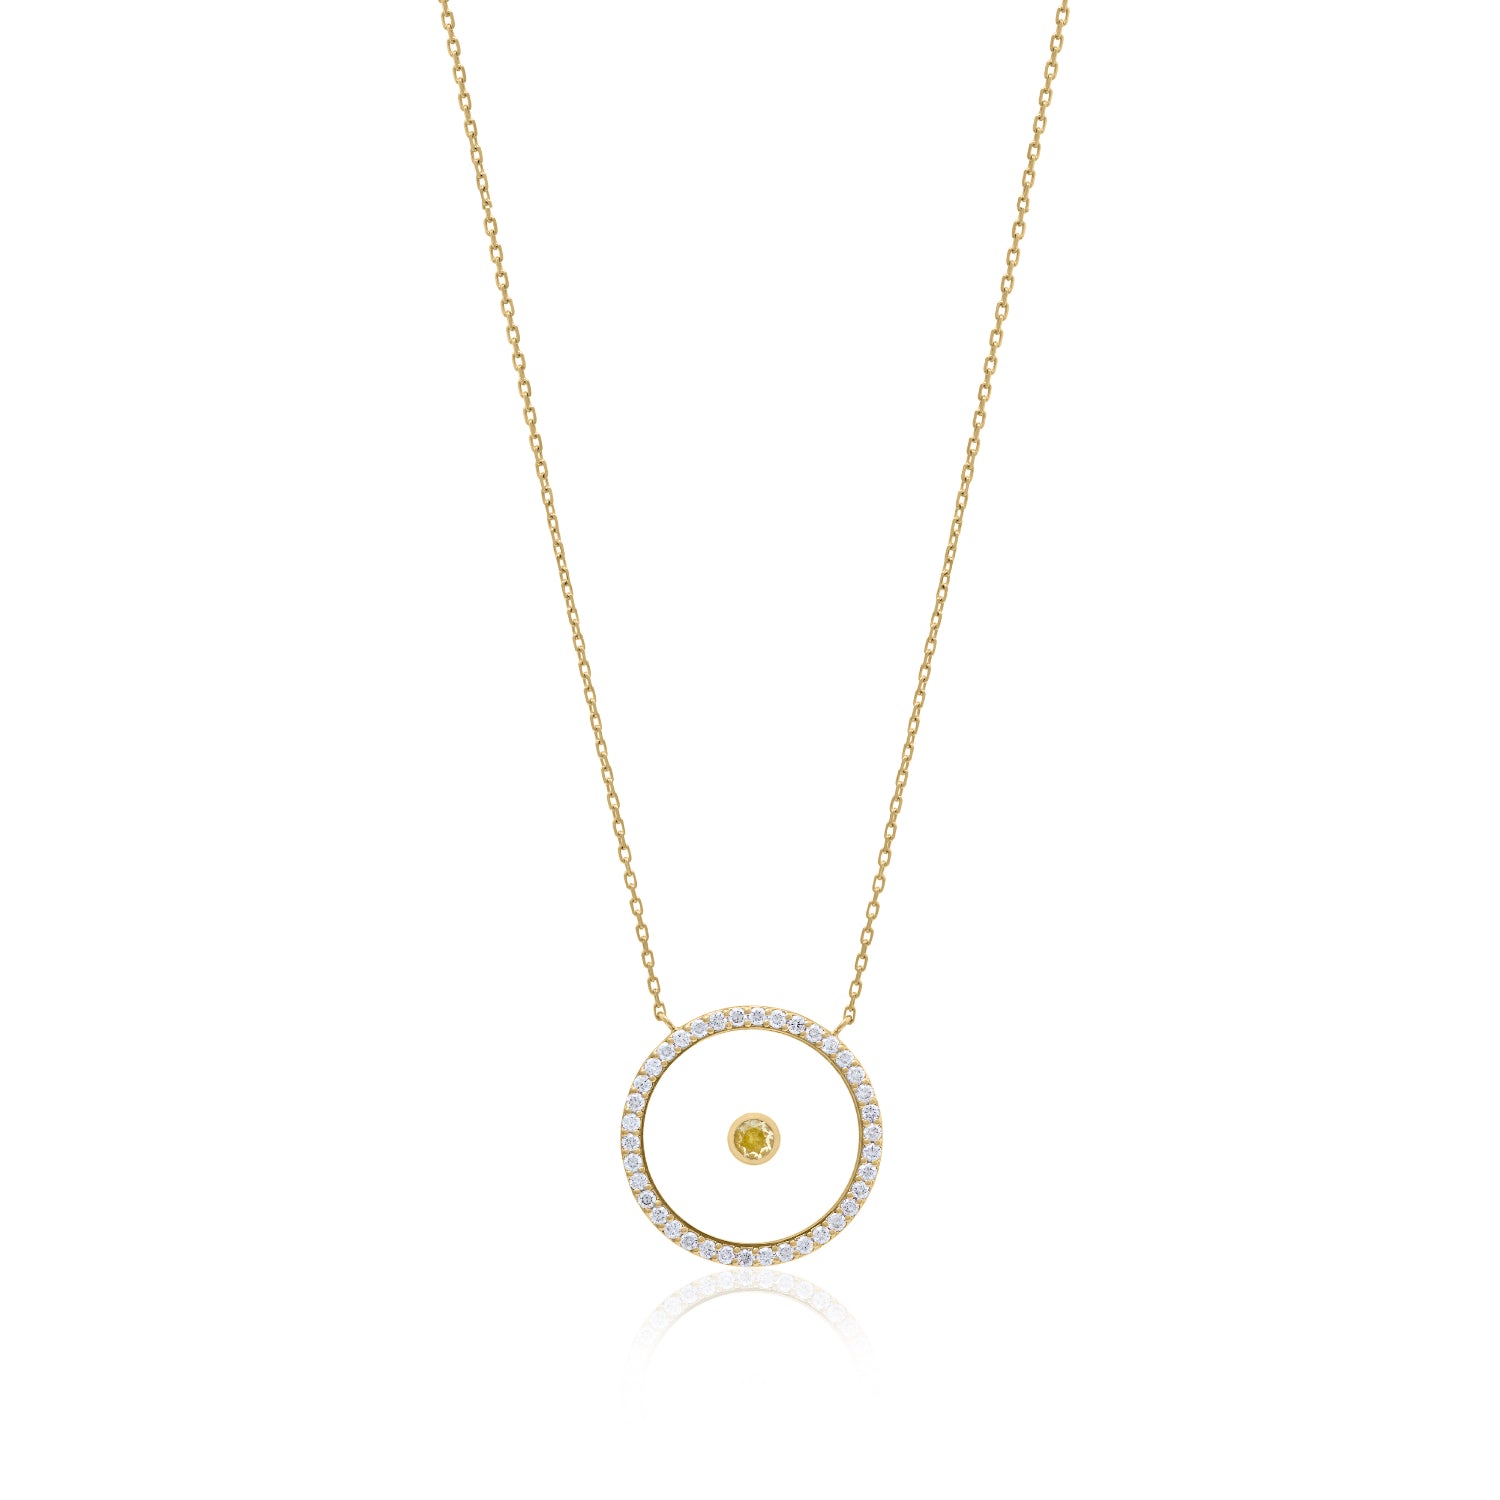 Citrine November Birthstone Necklace in Yellow Gold